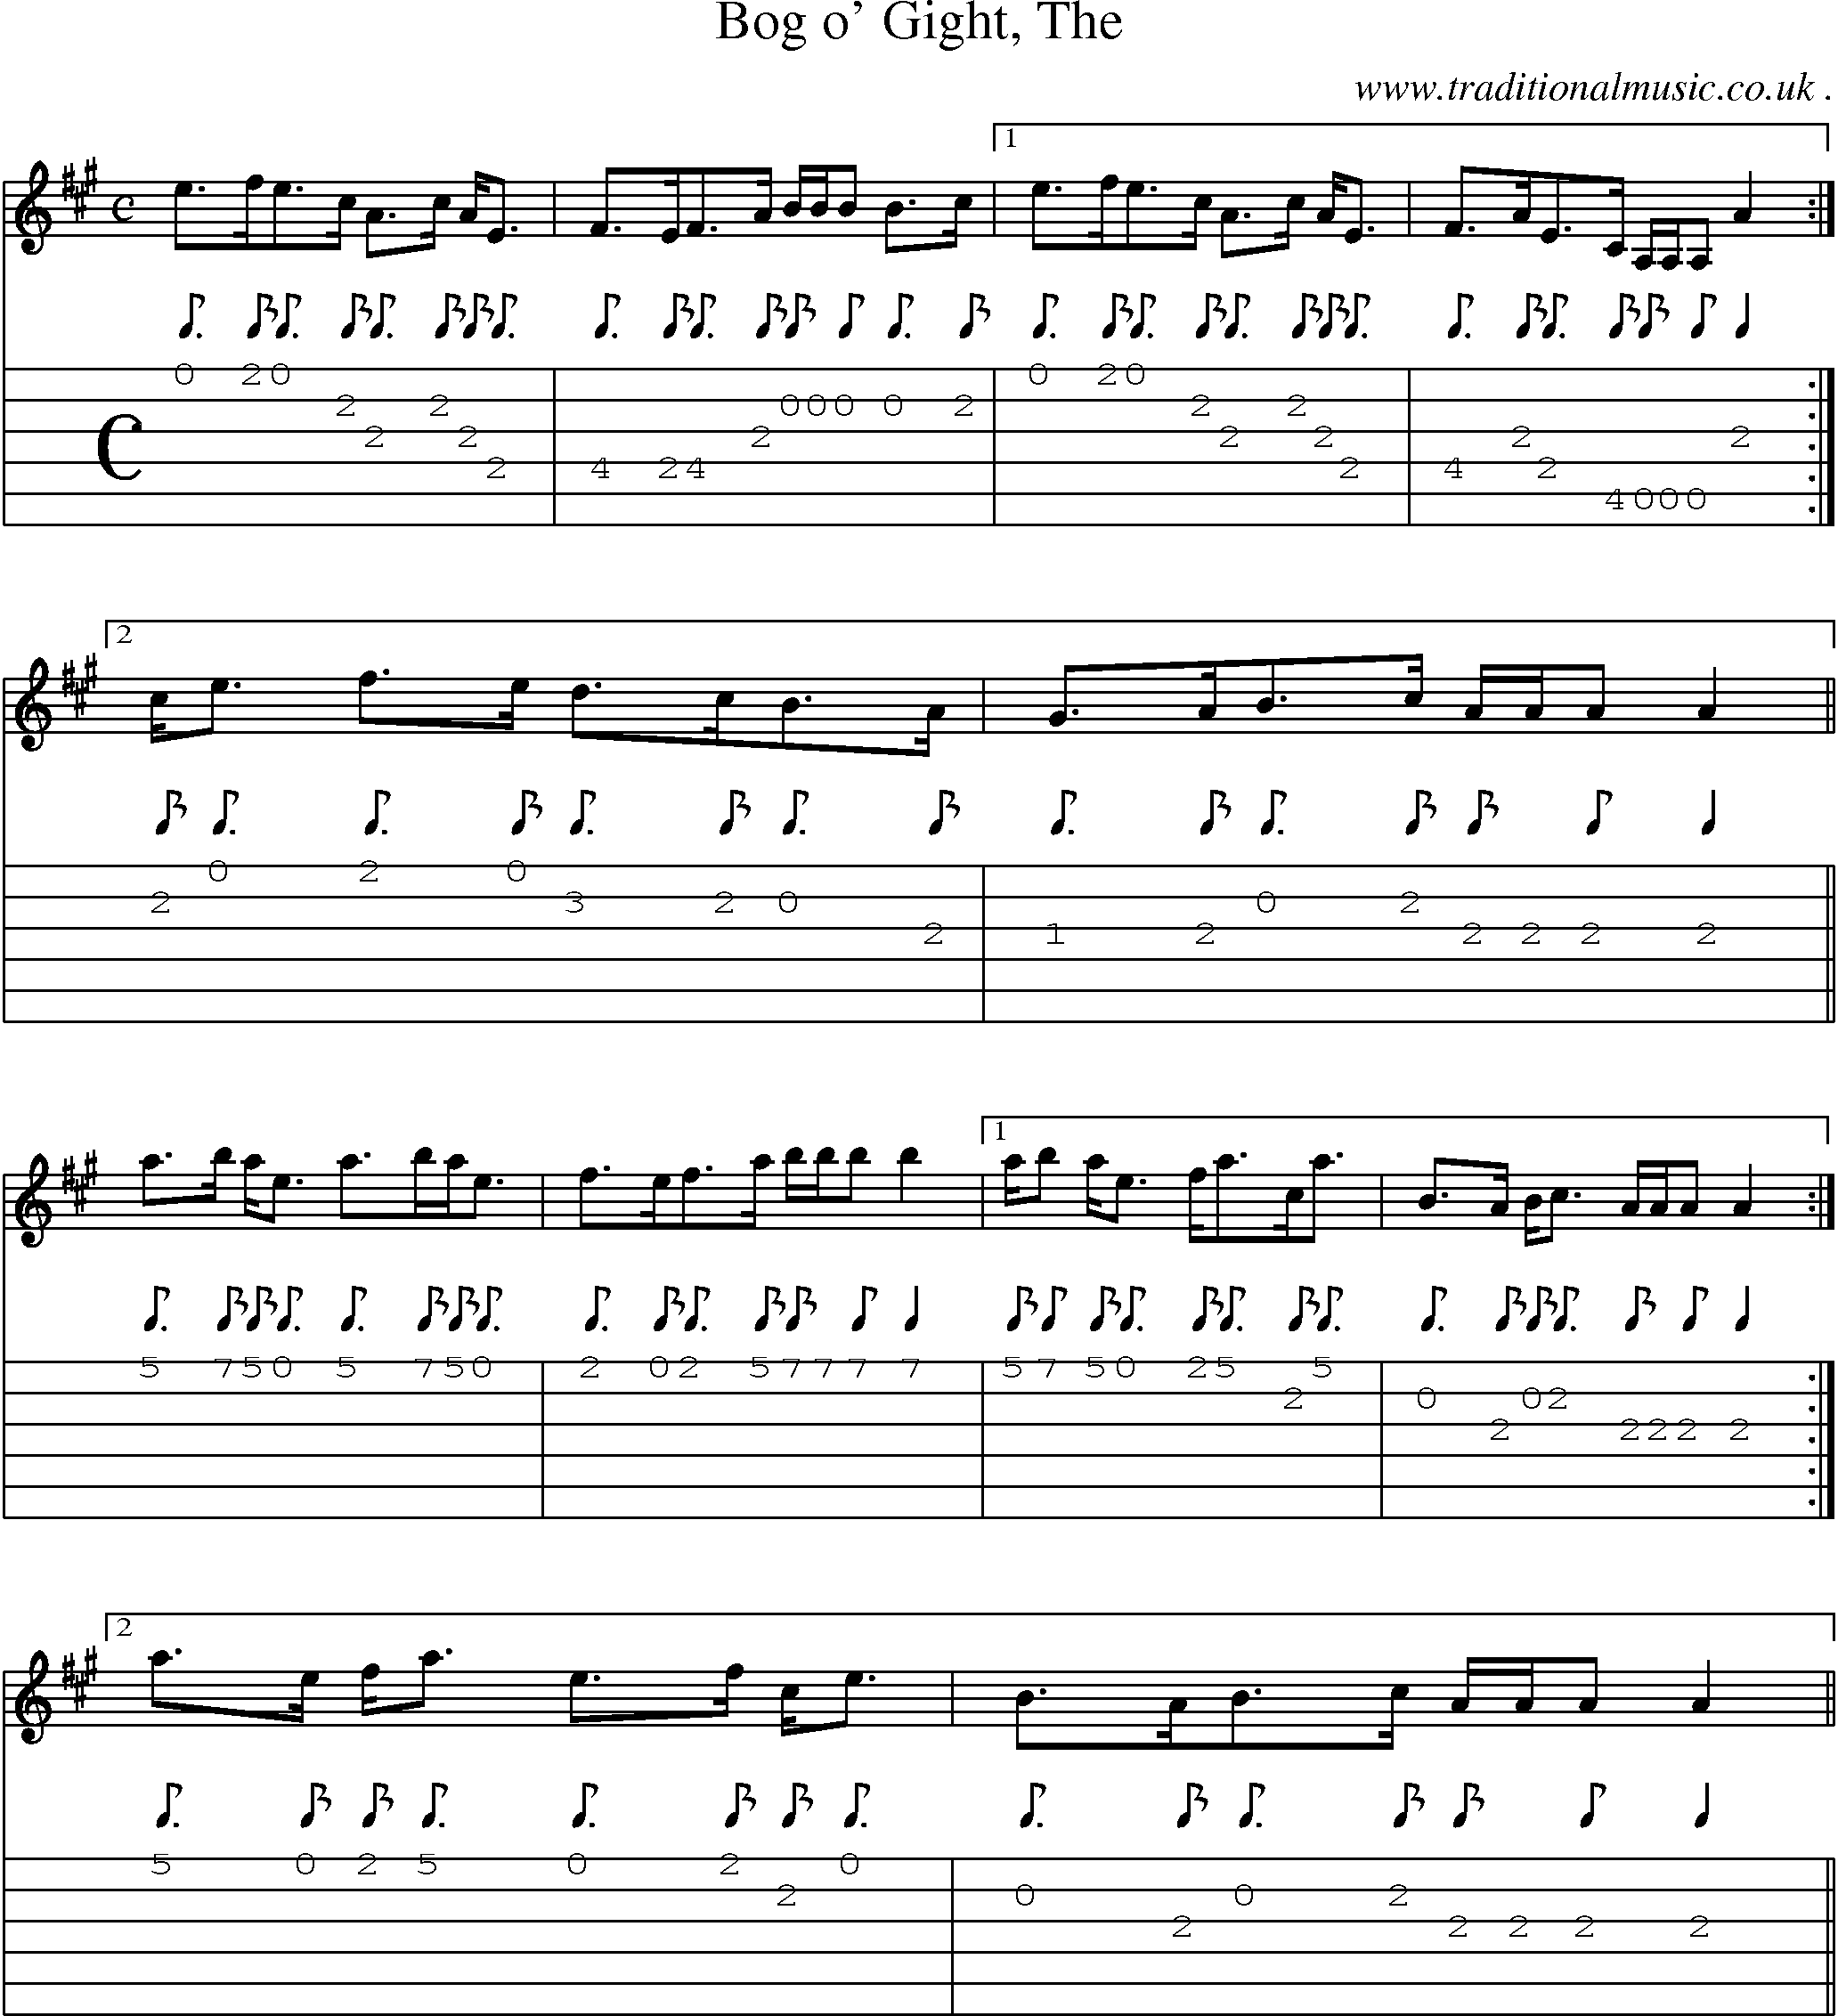 Sheet-music  score, Chords and Guitar Tabs for Bog O Gight The